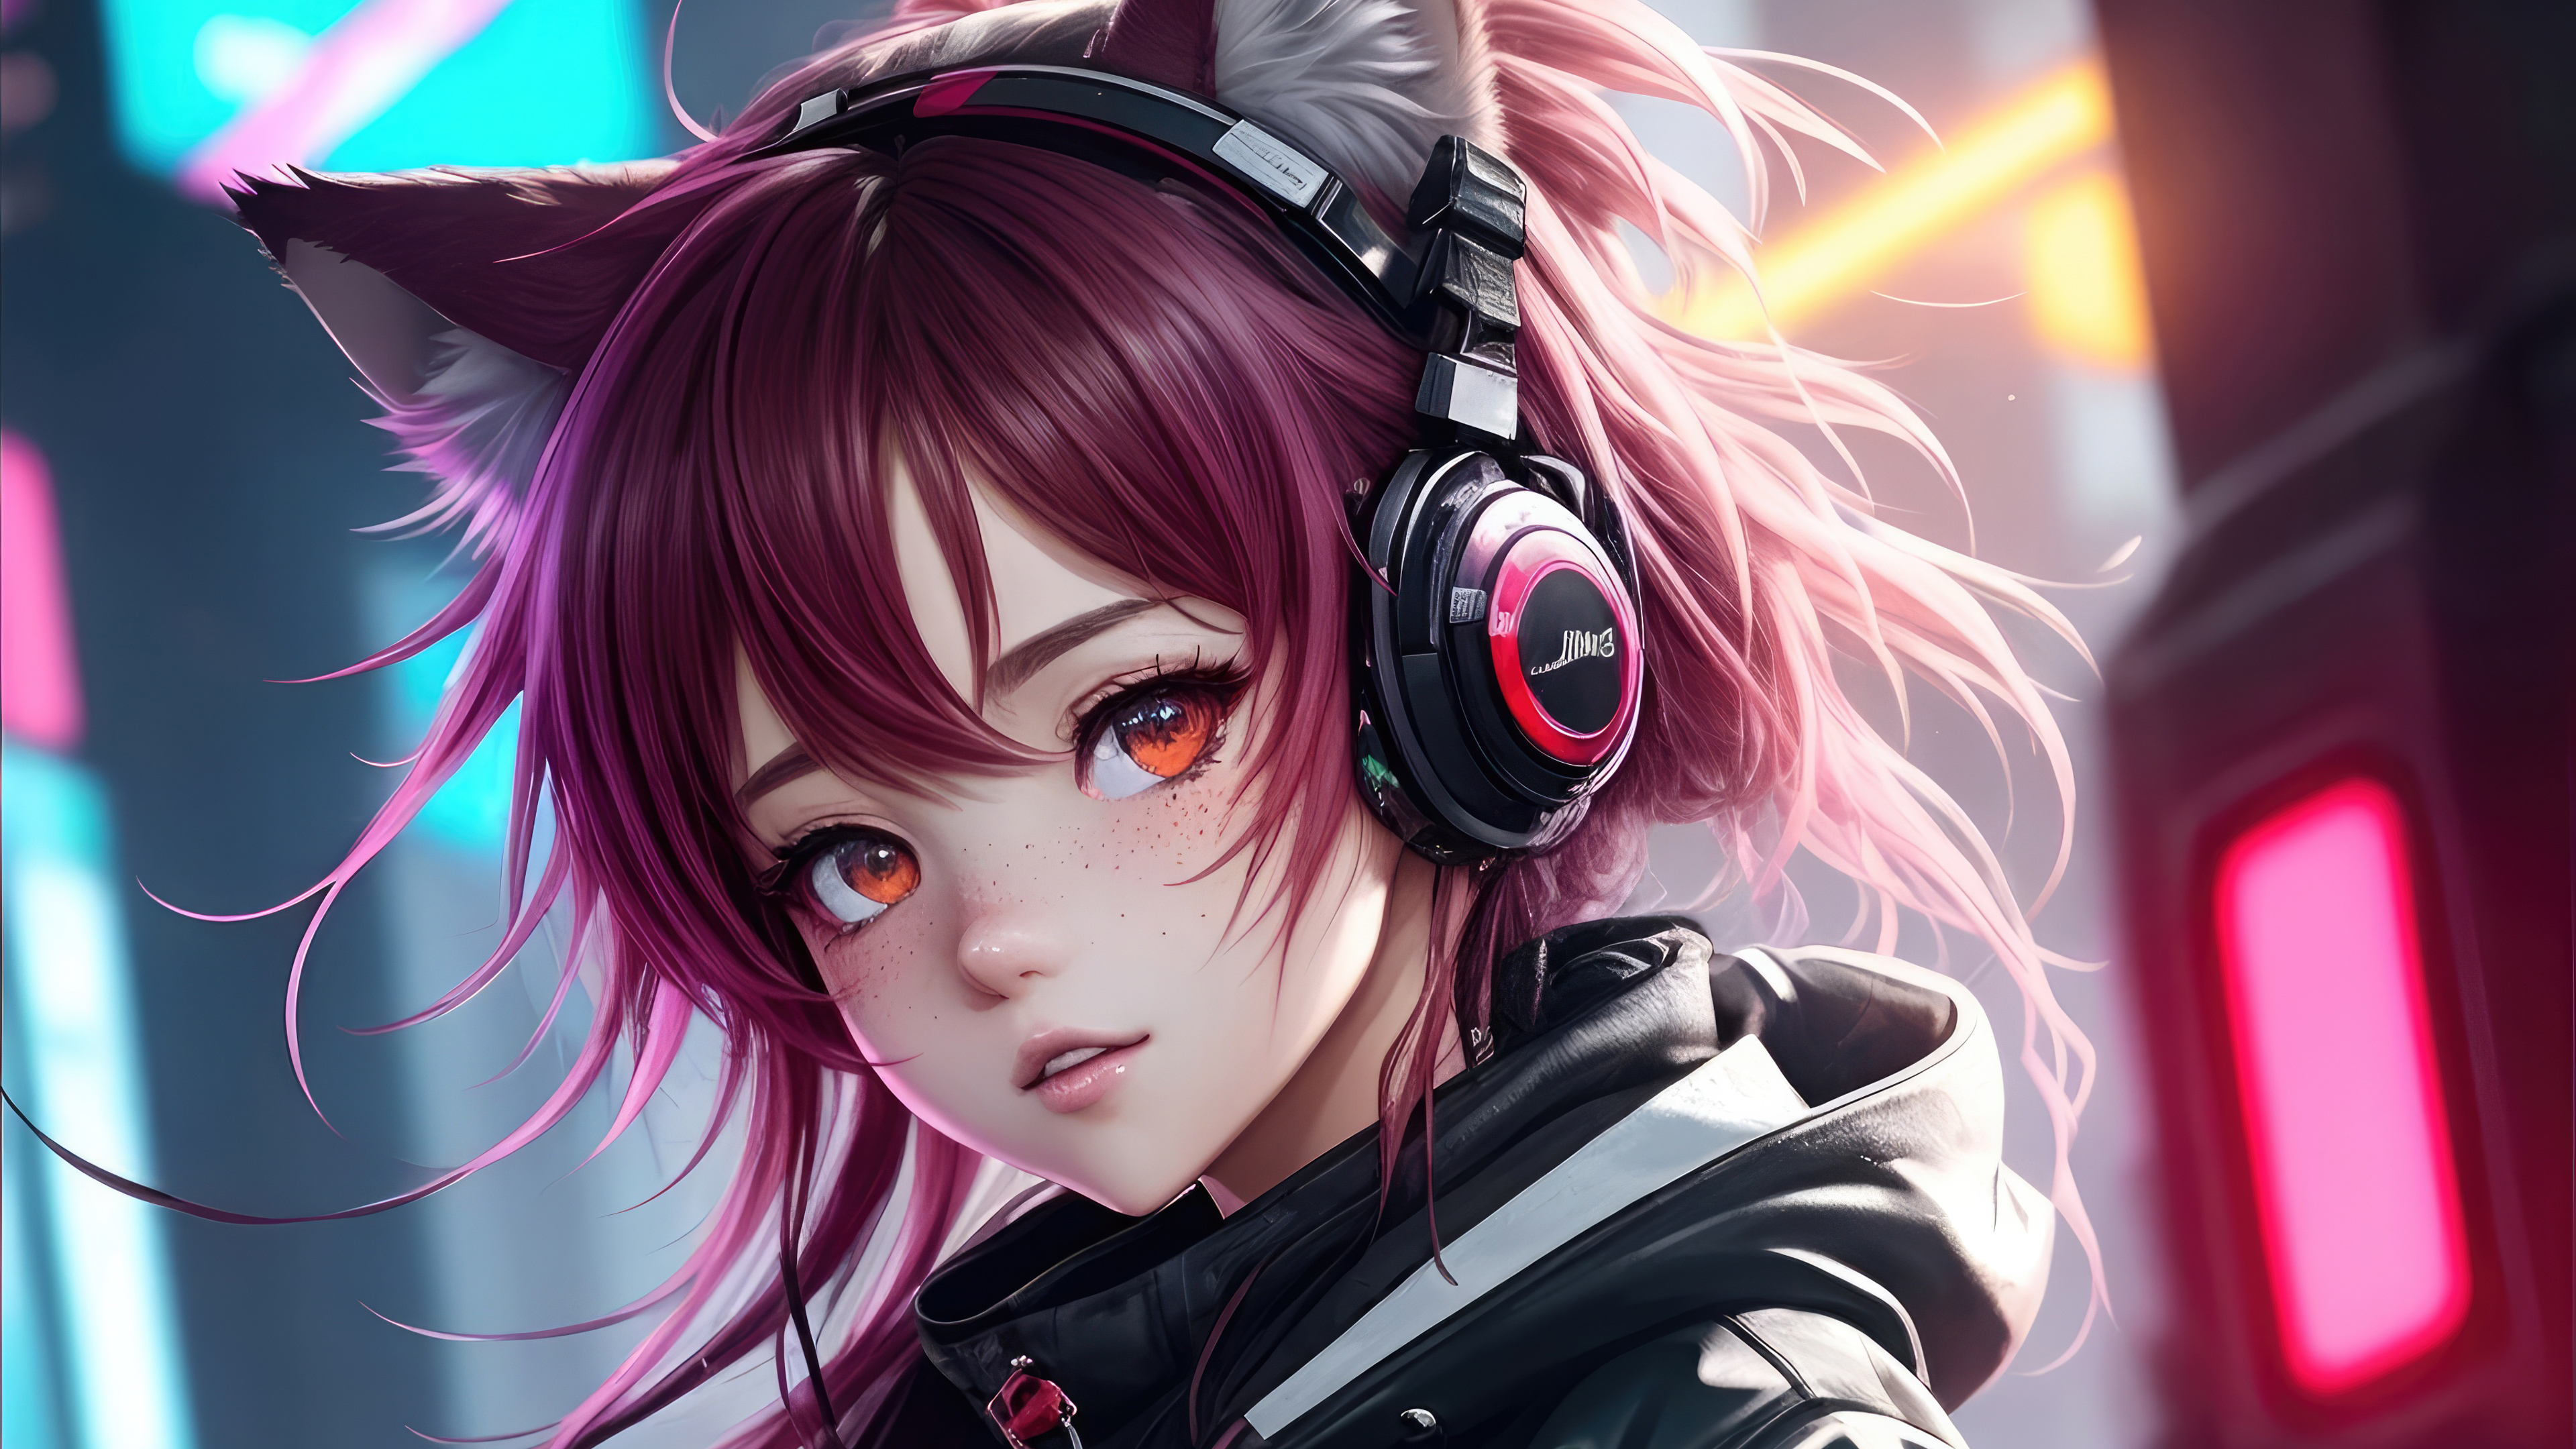 Custom I will create cyberpunk anime style illustration for you Art  Commission | Sketchmob